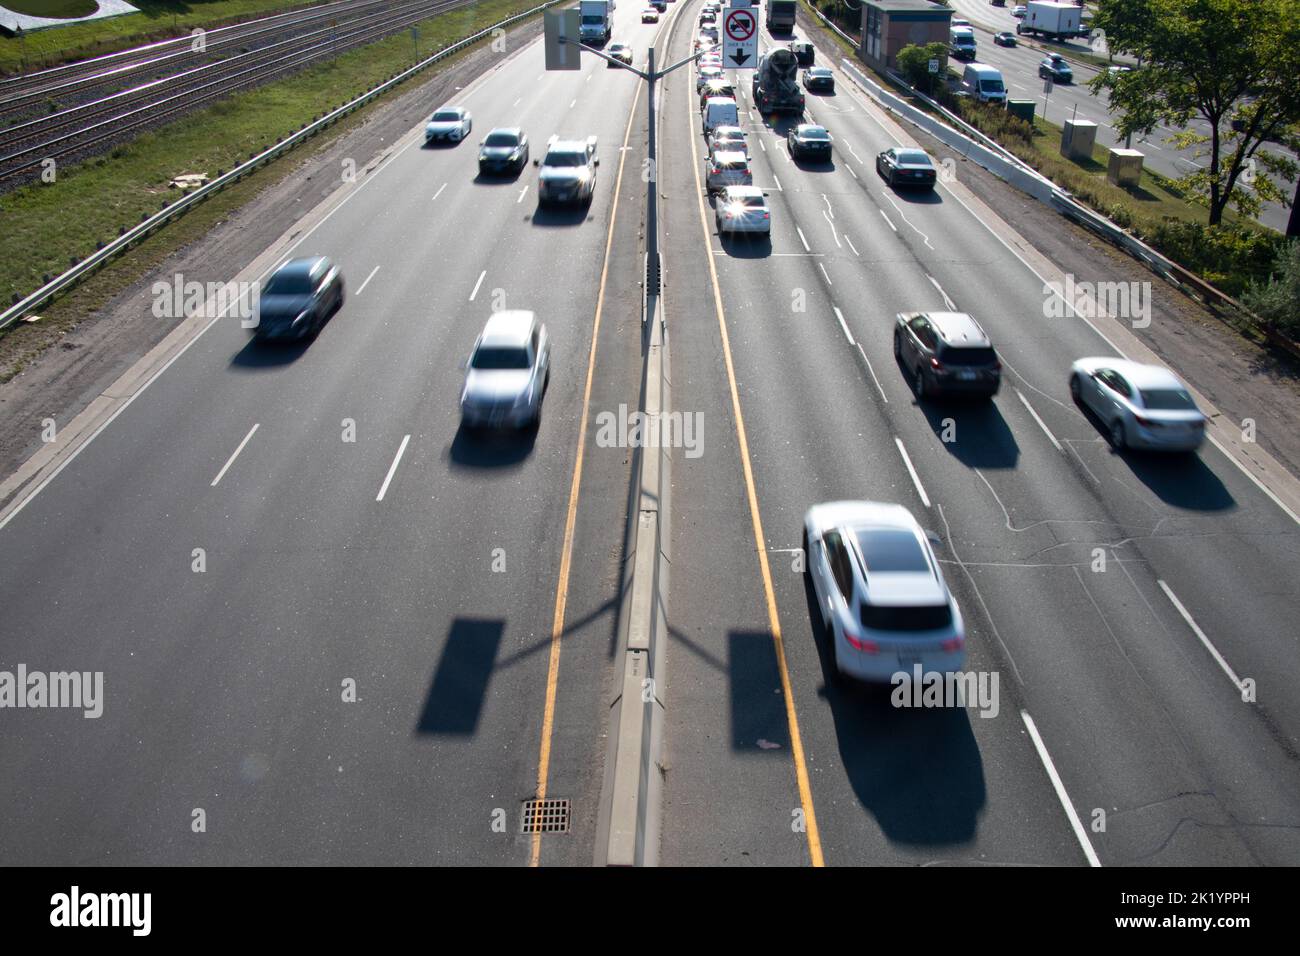 Blurred traffic passes below on a busy multi-lane highway on a sunny morning. Stock Photo